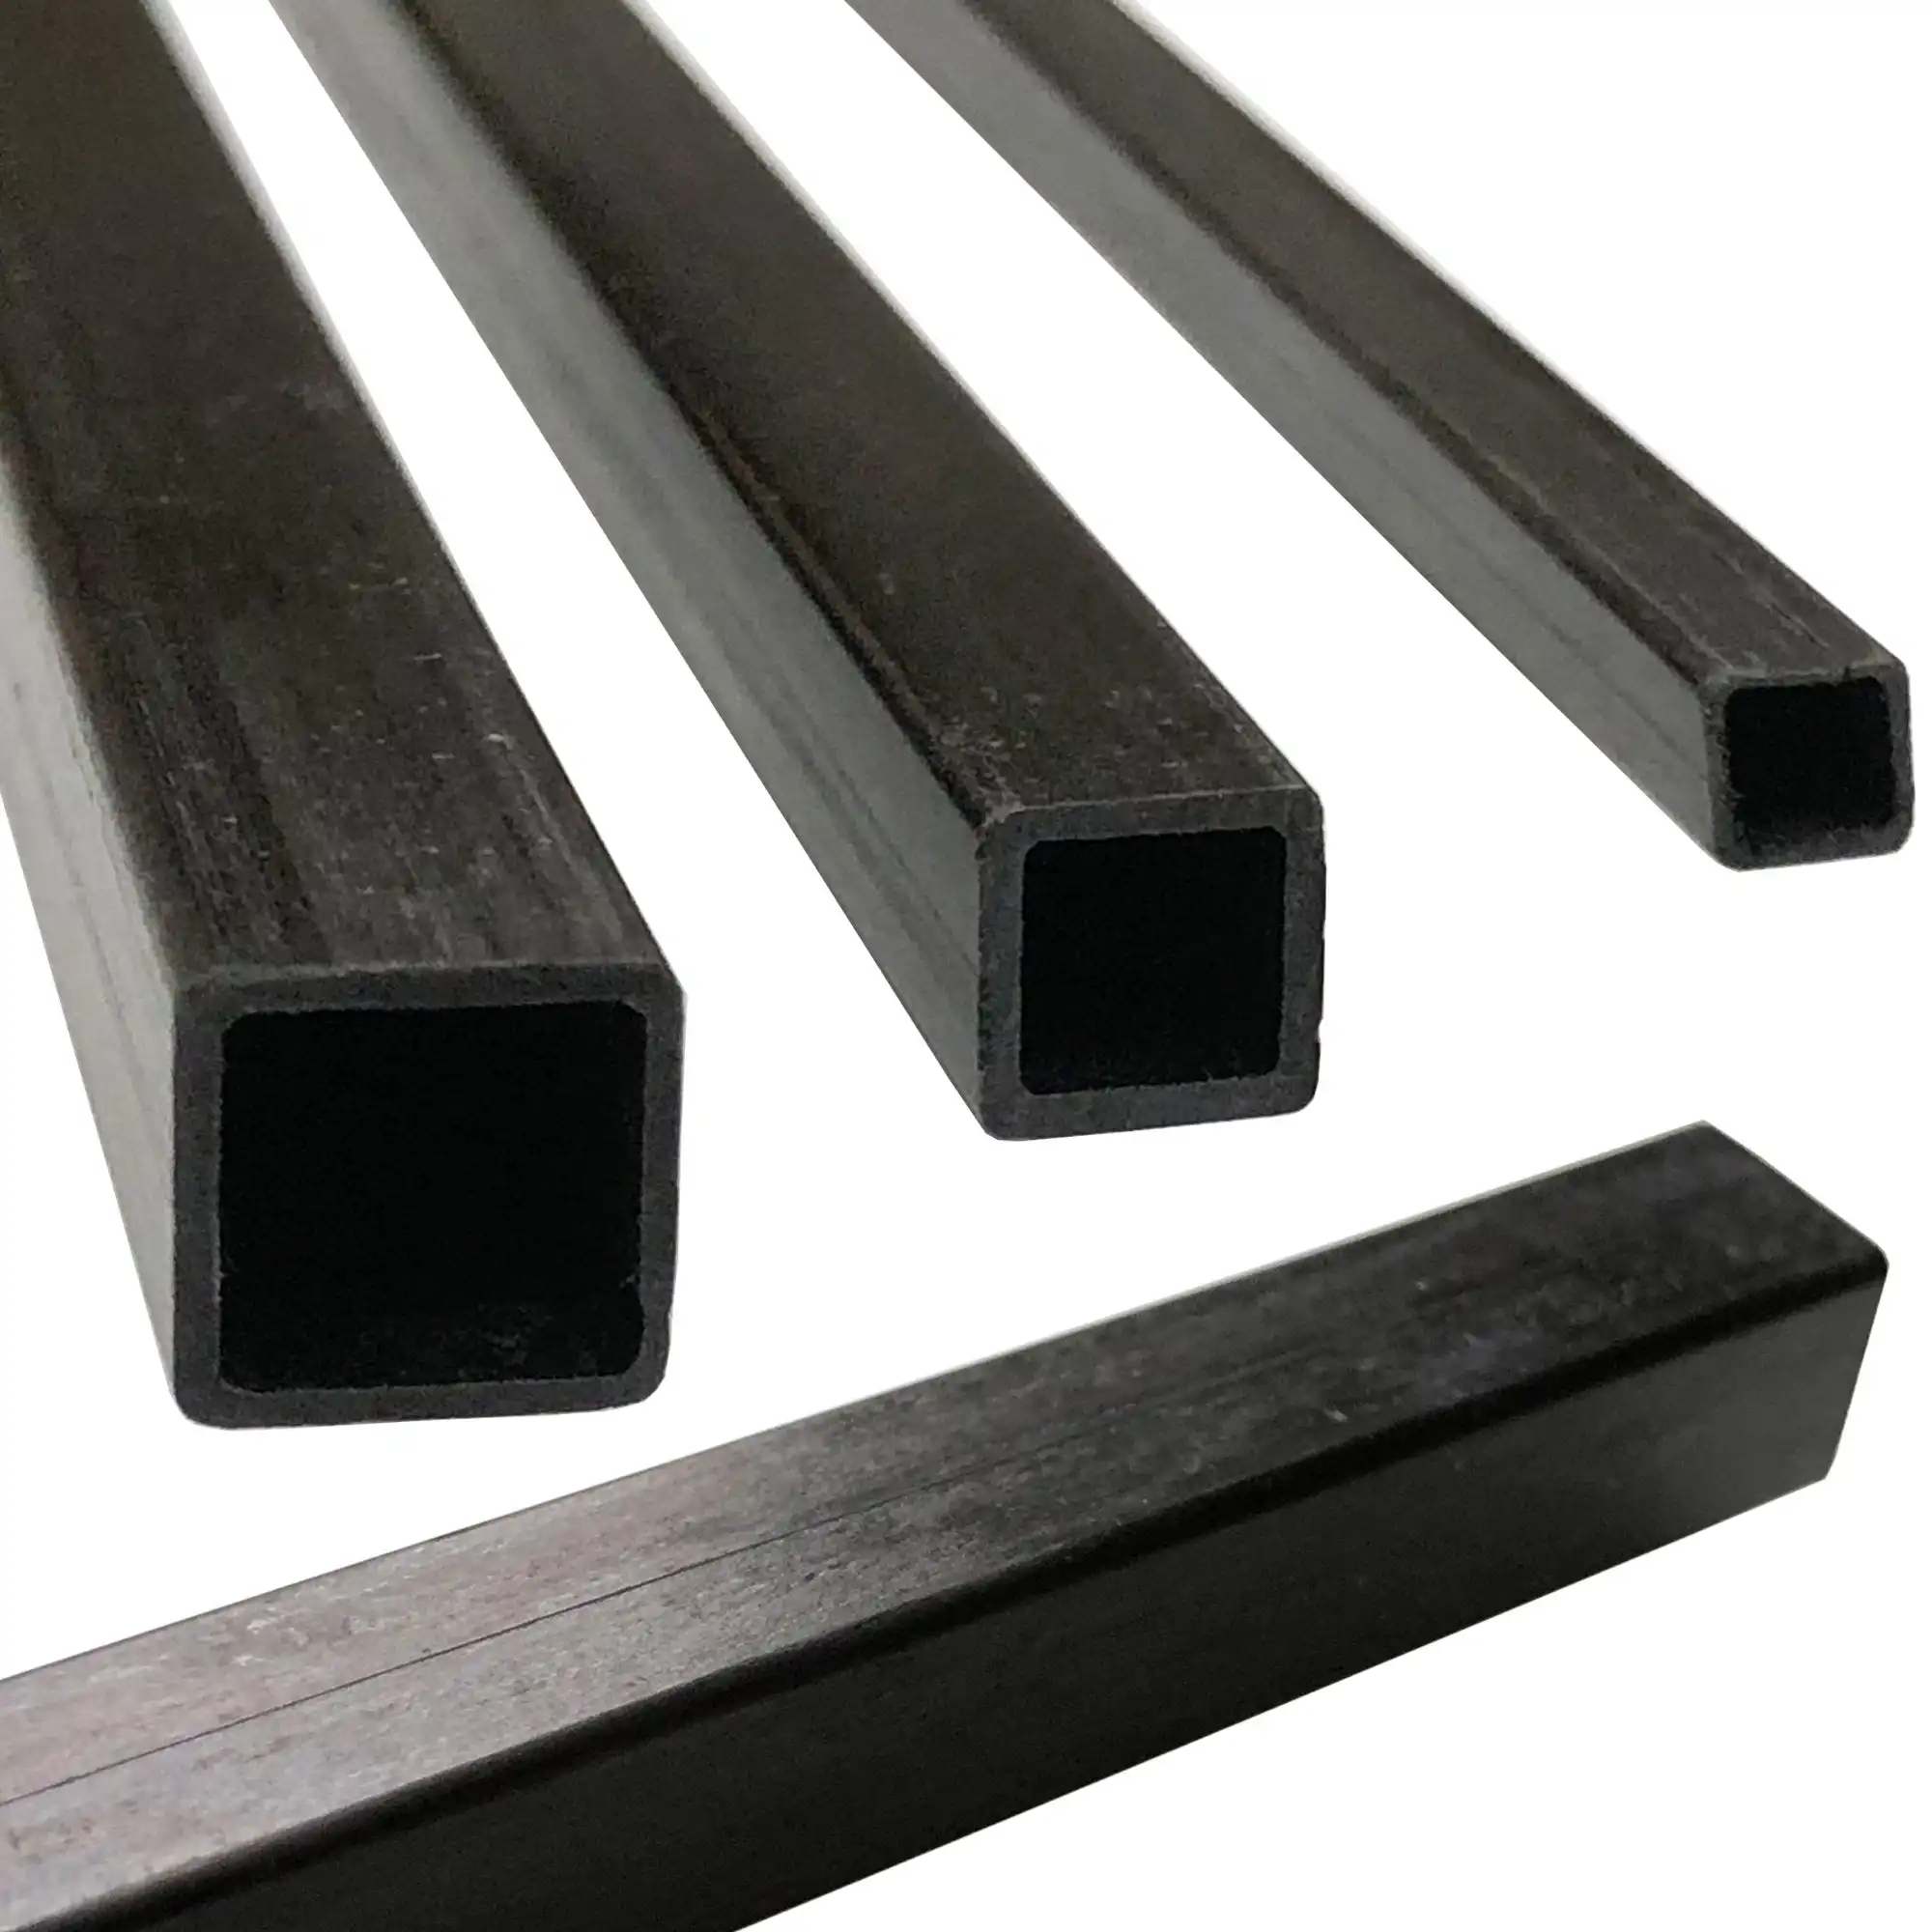 SHS Square hollow sections 200x200 mm 1 inch 4x4 8x8 inch ms metal square steel tube